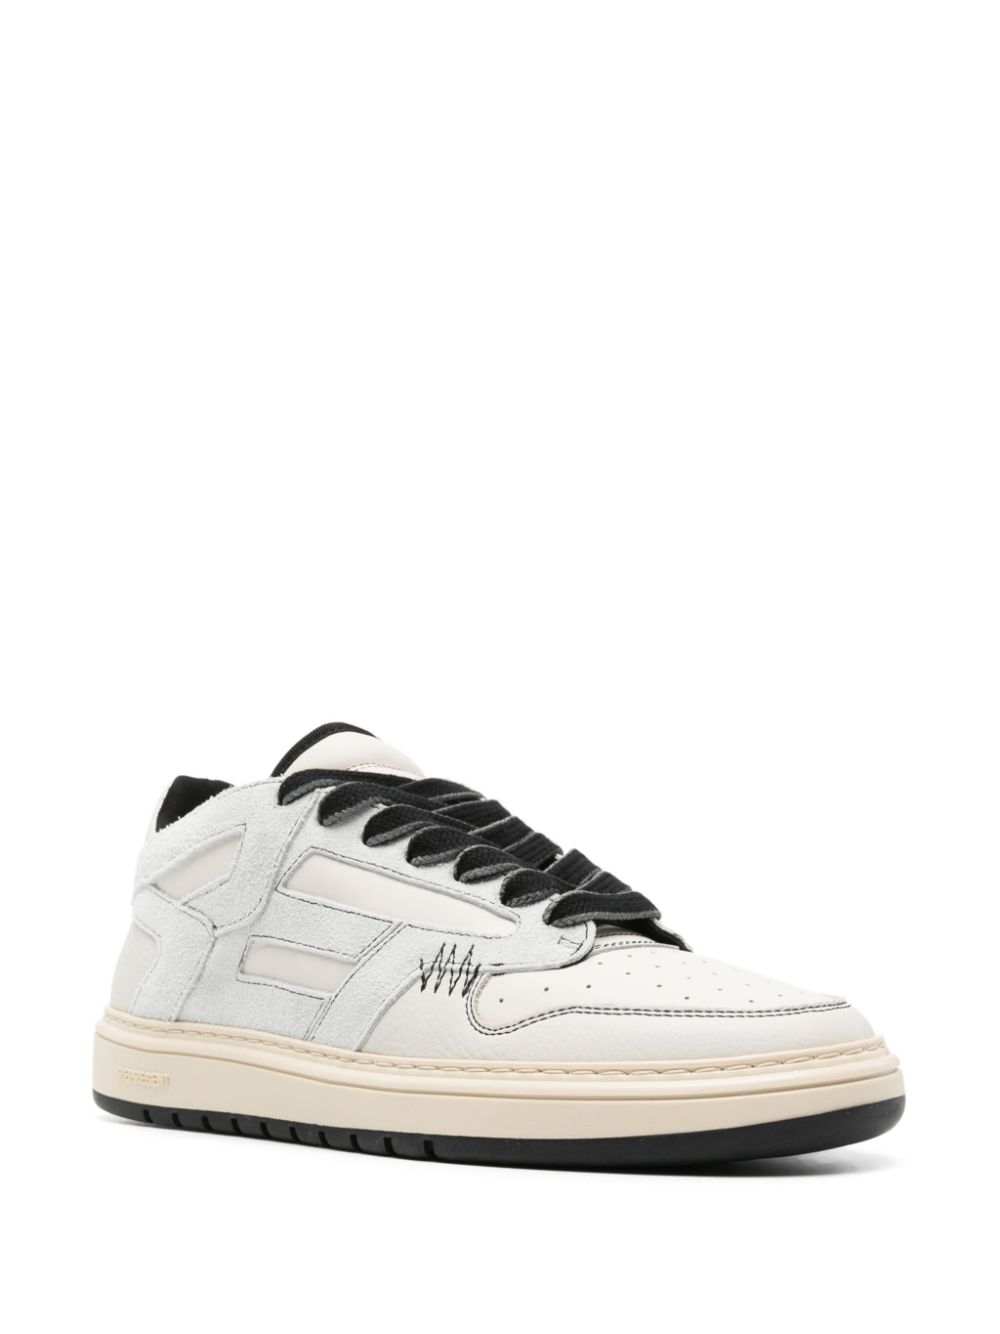 Represent Reptor lace-up sneakers - Beige